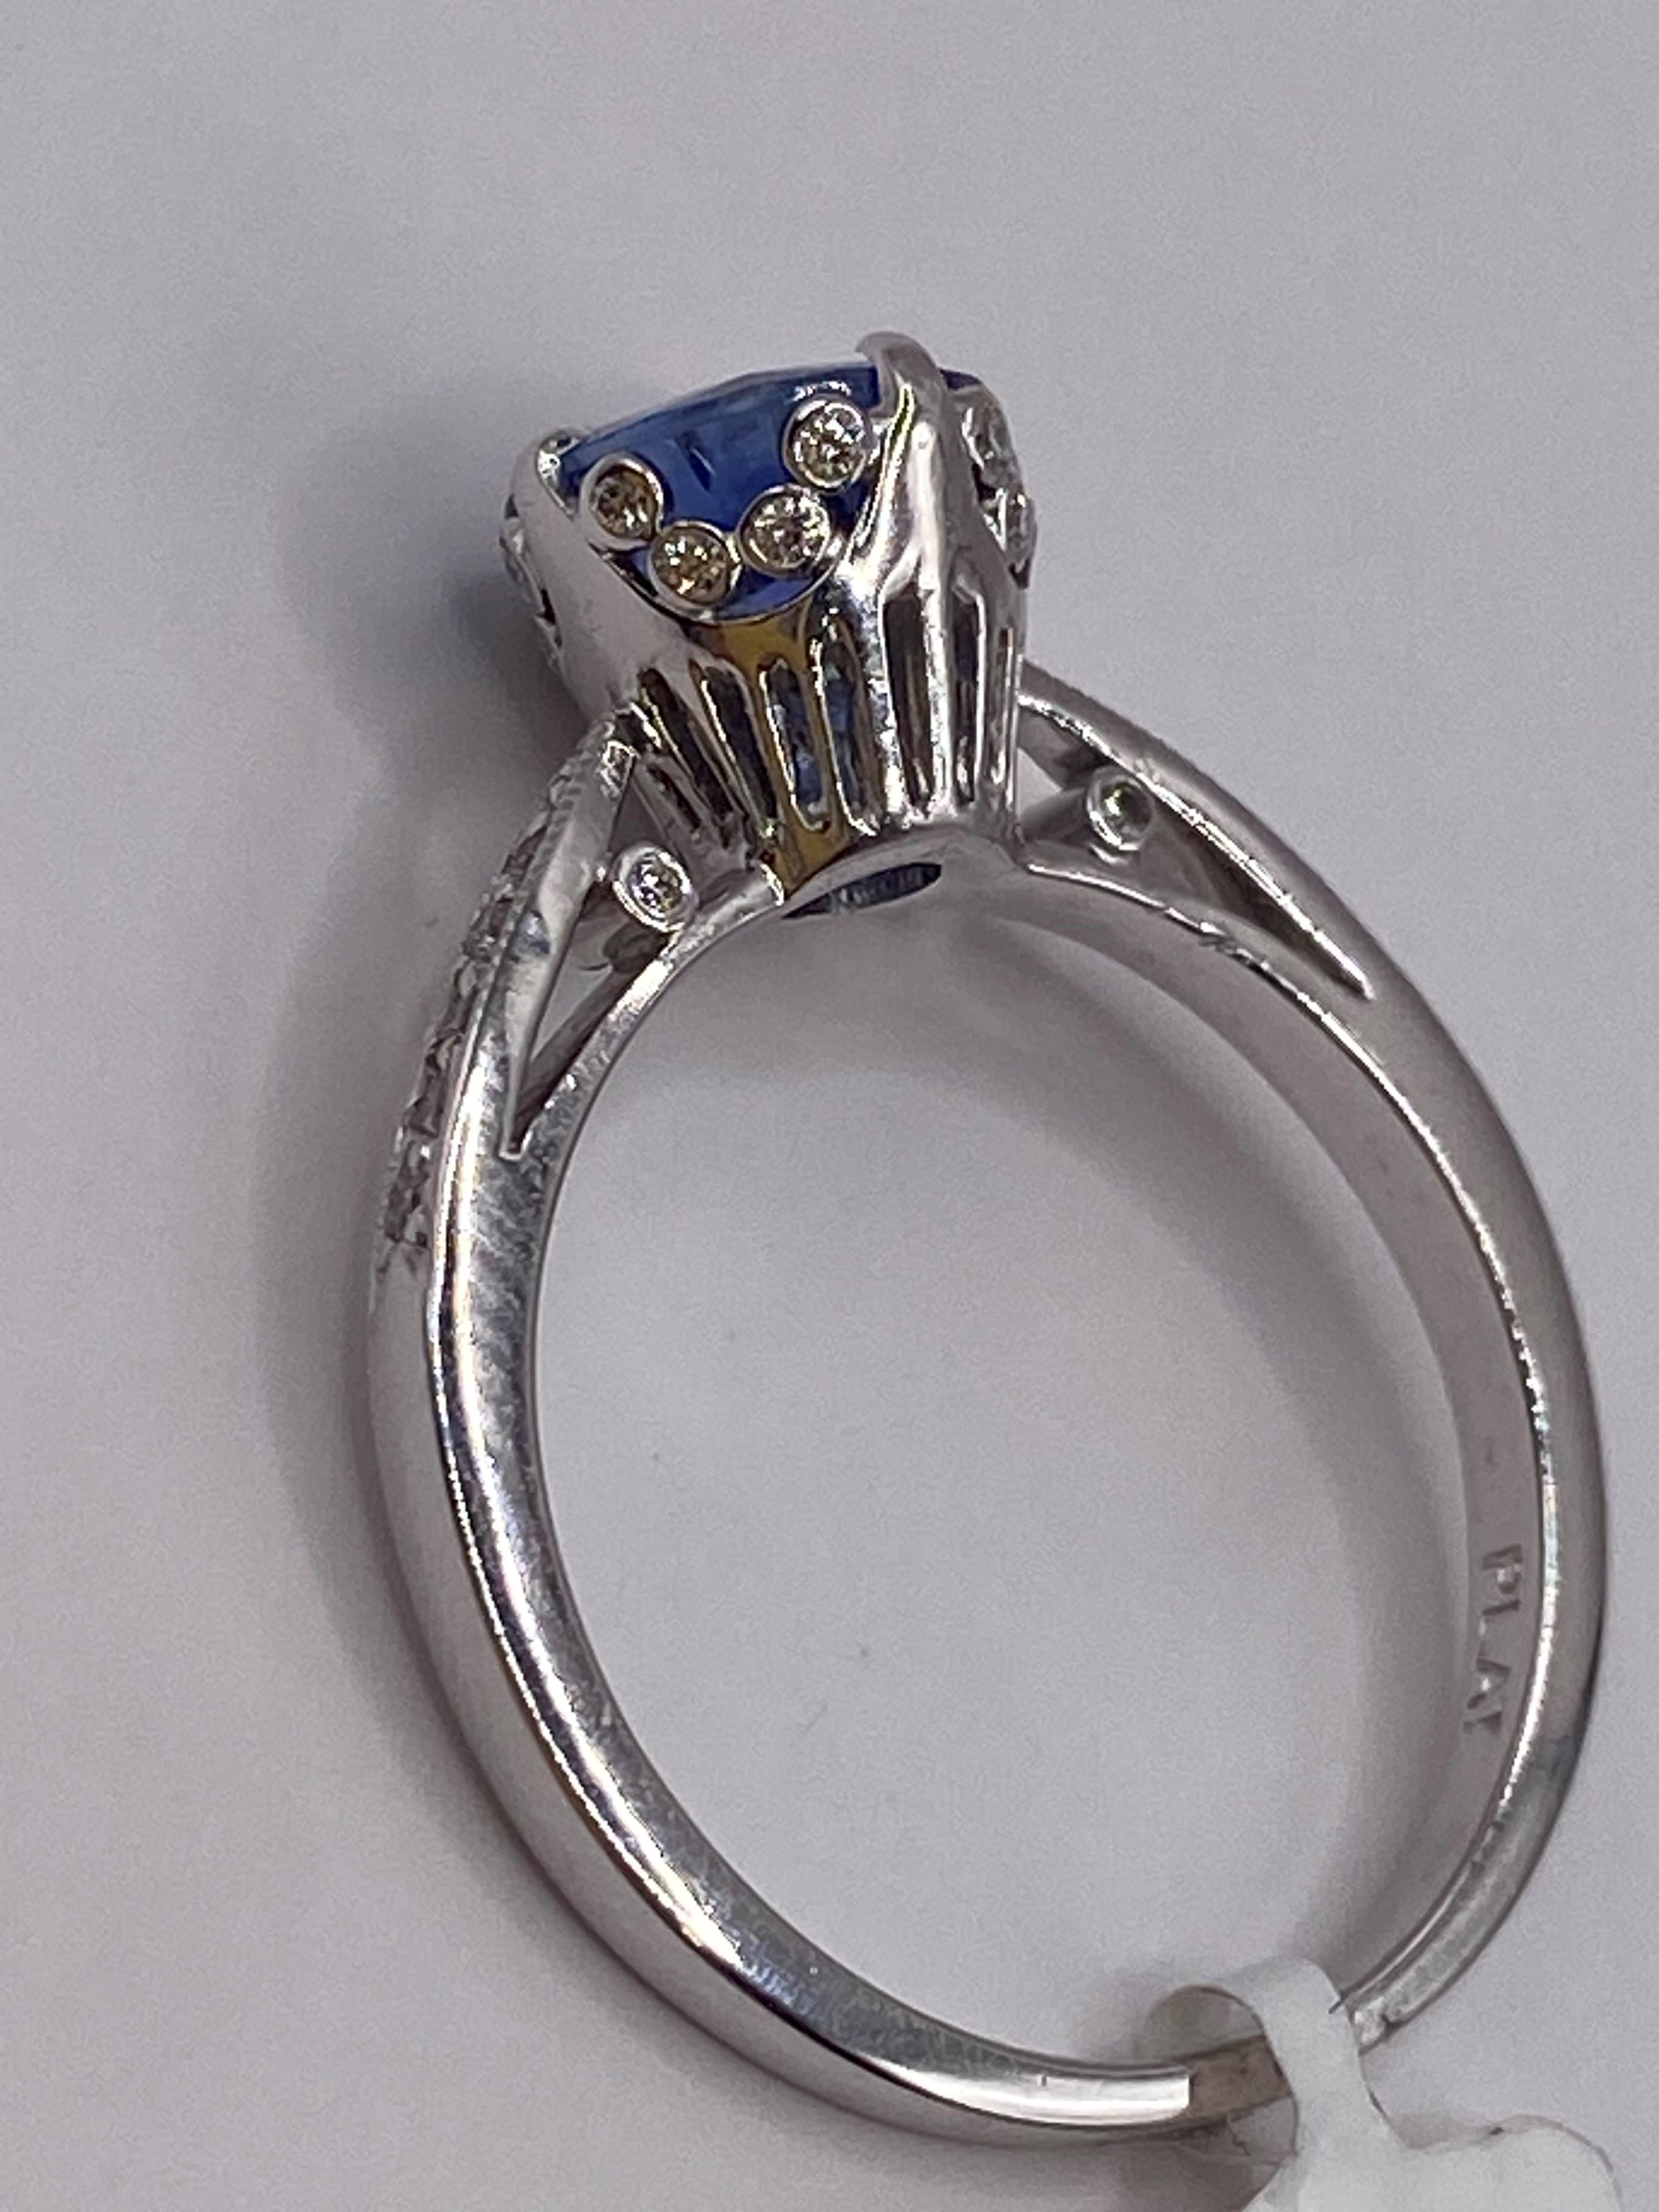 Platinum
Finger Size: 6.5
(ring is size 6.5, but is sizable upon request)

Number of Sapphires: 1
Carat Weight: 1.38ct
Stone Size: 7.20mm

Number of Round Diamonds: 31
Carat Weight: 0.26ctw